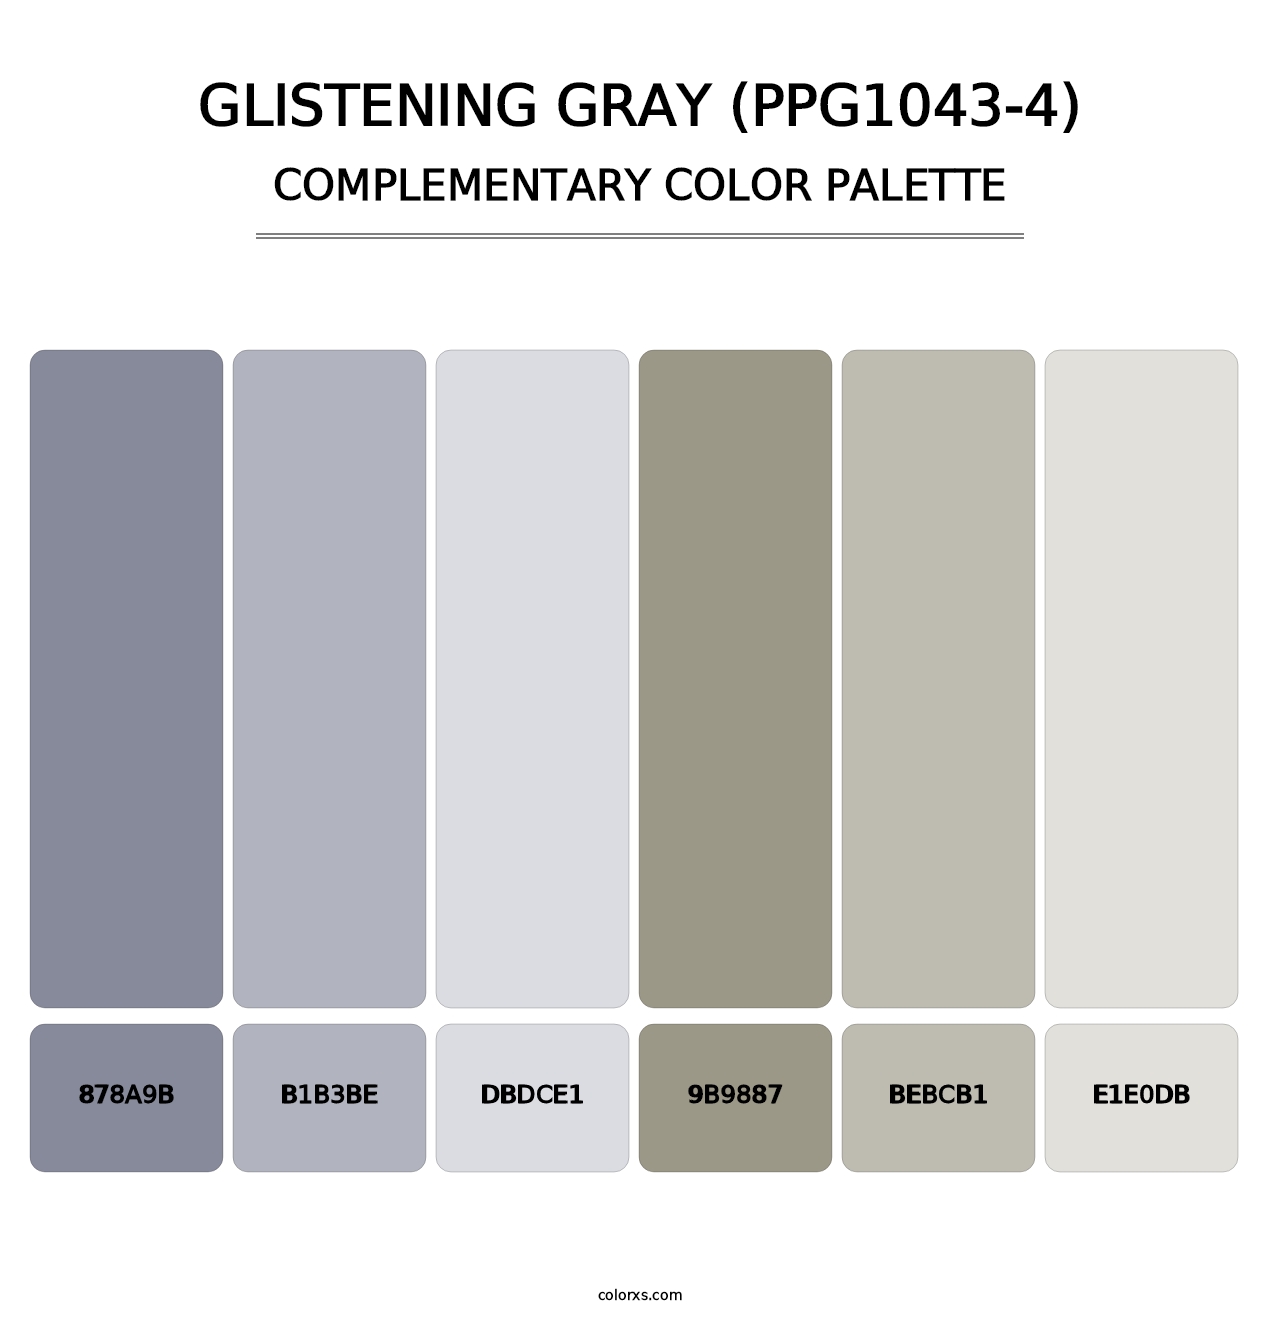 Glistening Gray (PPG1043-4) - Complementary Color Palette